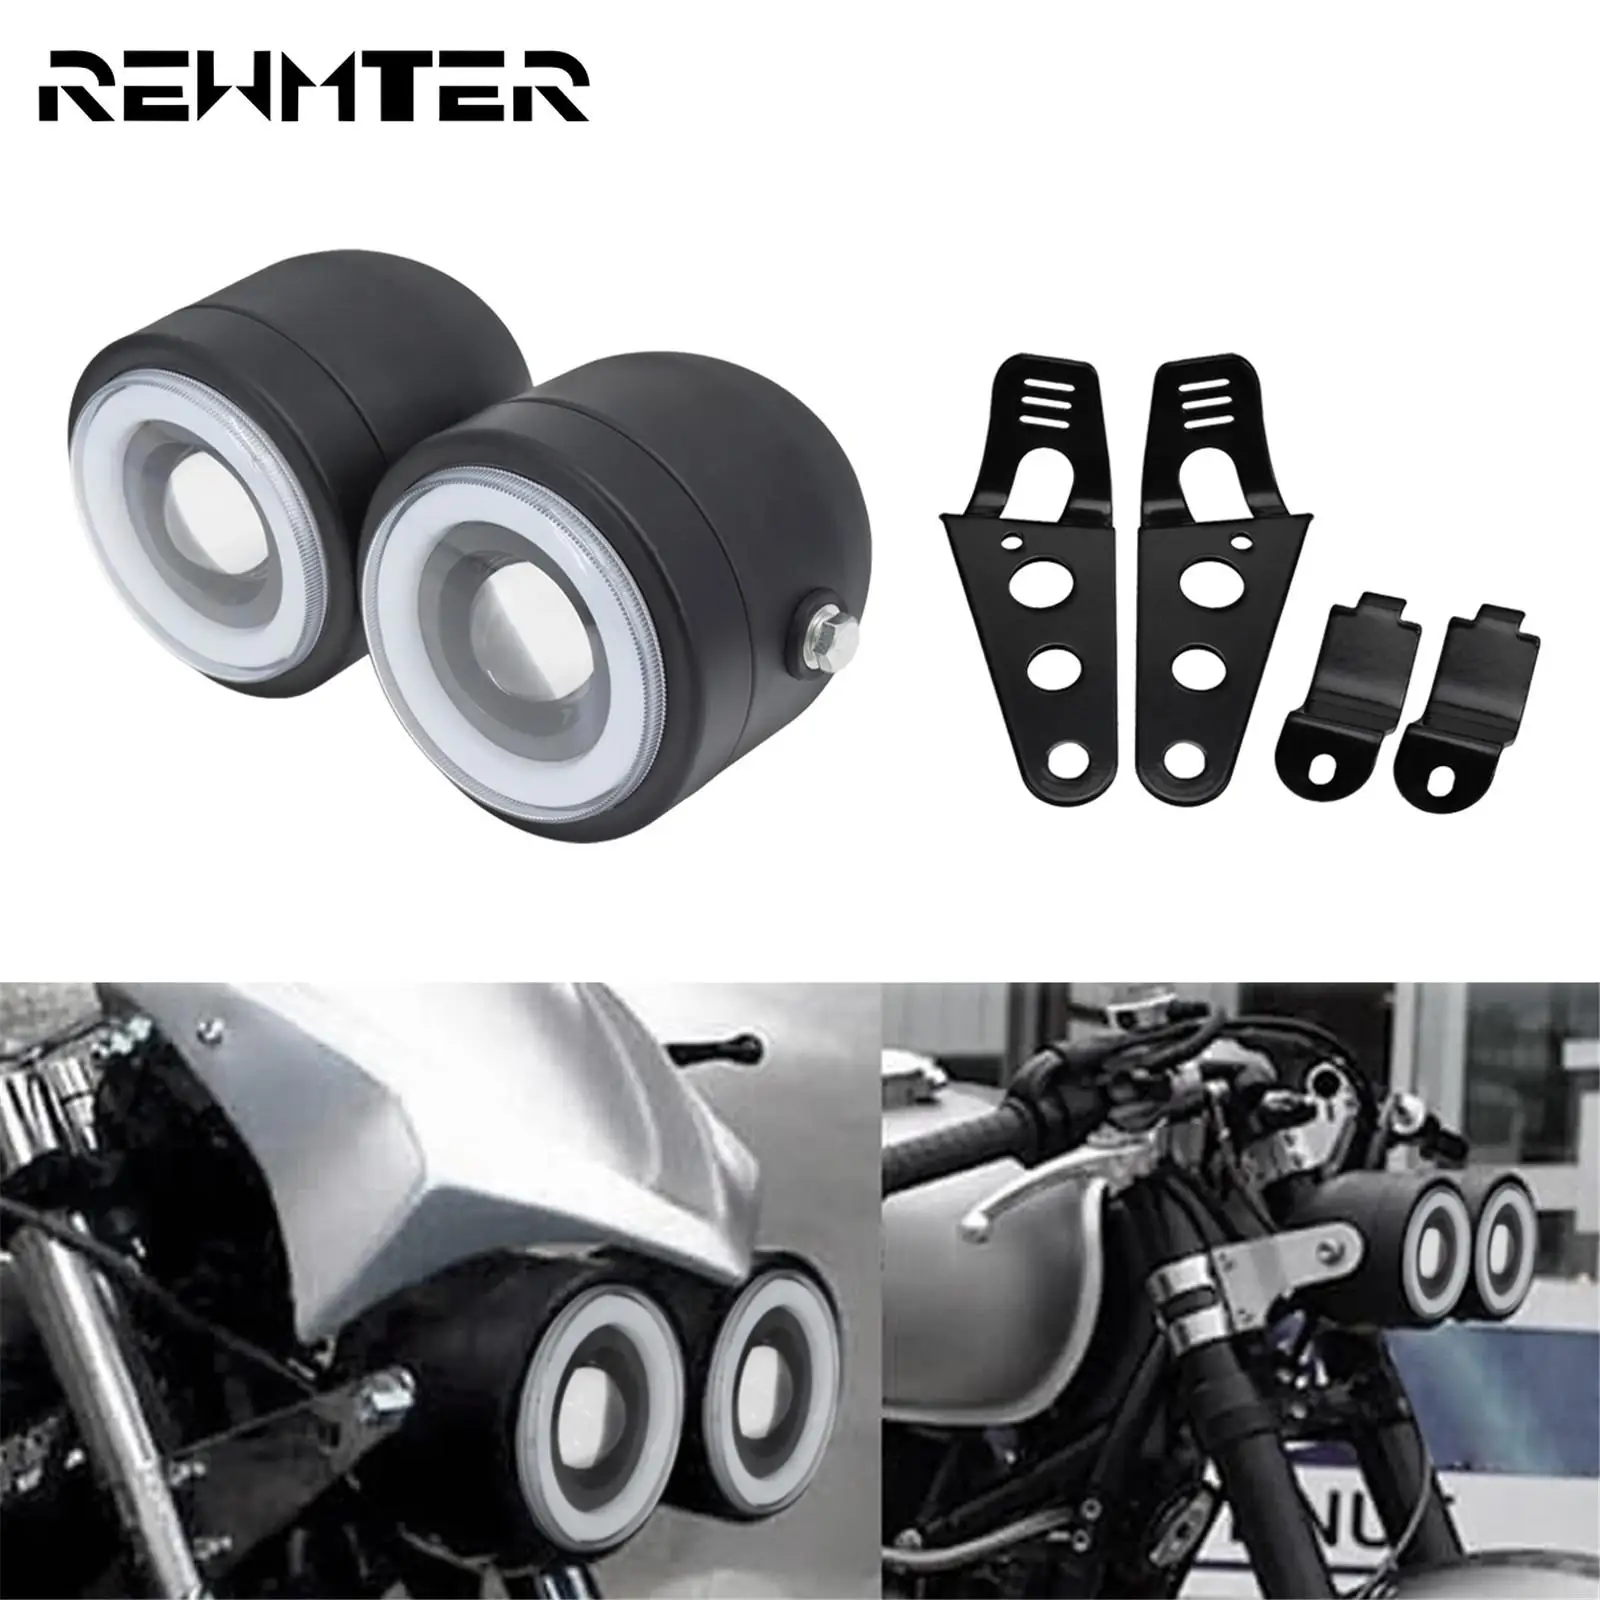 

Motorcycle Double Twin Dual Headlight Amber Angel Eyes Headlamp W/Bracket Mount Holder Black For Harley Cafe Racer Dyna Softail